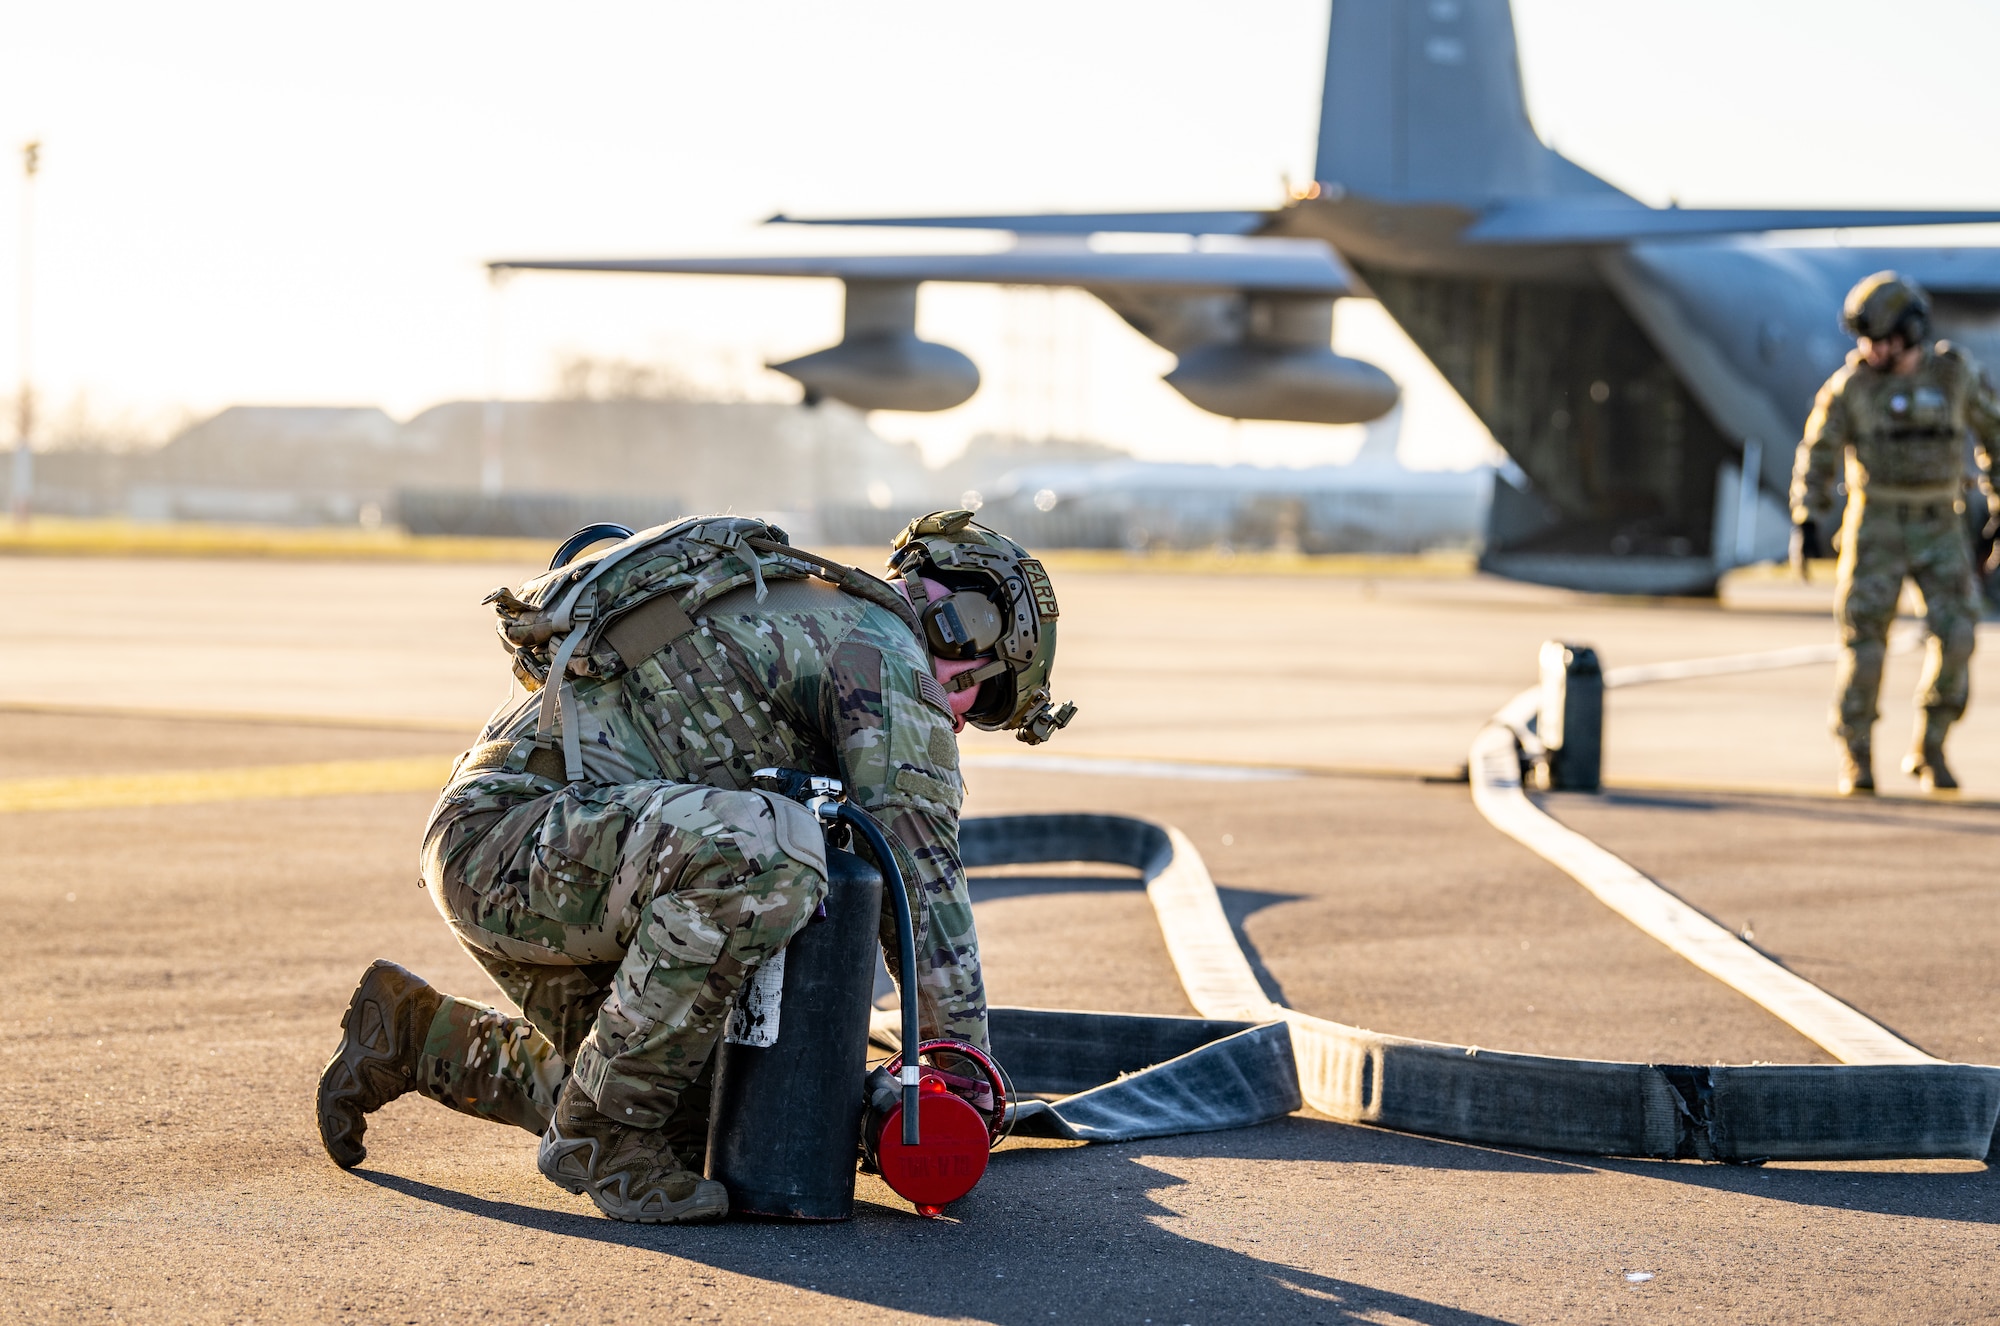 A 100th Logistics Readiness Squadron forward area refueling point (FARP) specialist assigned to the 100th Air Refueling Wing, works to secure a fuel hose during FARP training at Royal Air Force Mildenhall, England, Feb. 6, 2023. FARP capabilities enable the 100th ARW and the 352nd Special Operations Wing to partner together and provide critical on-the-ground refueling to NATO allies and European partners in austere locations with a minimal footprint. (U.S. Air Force photo by Staff Sgt. Kevin Long)